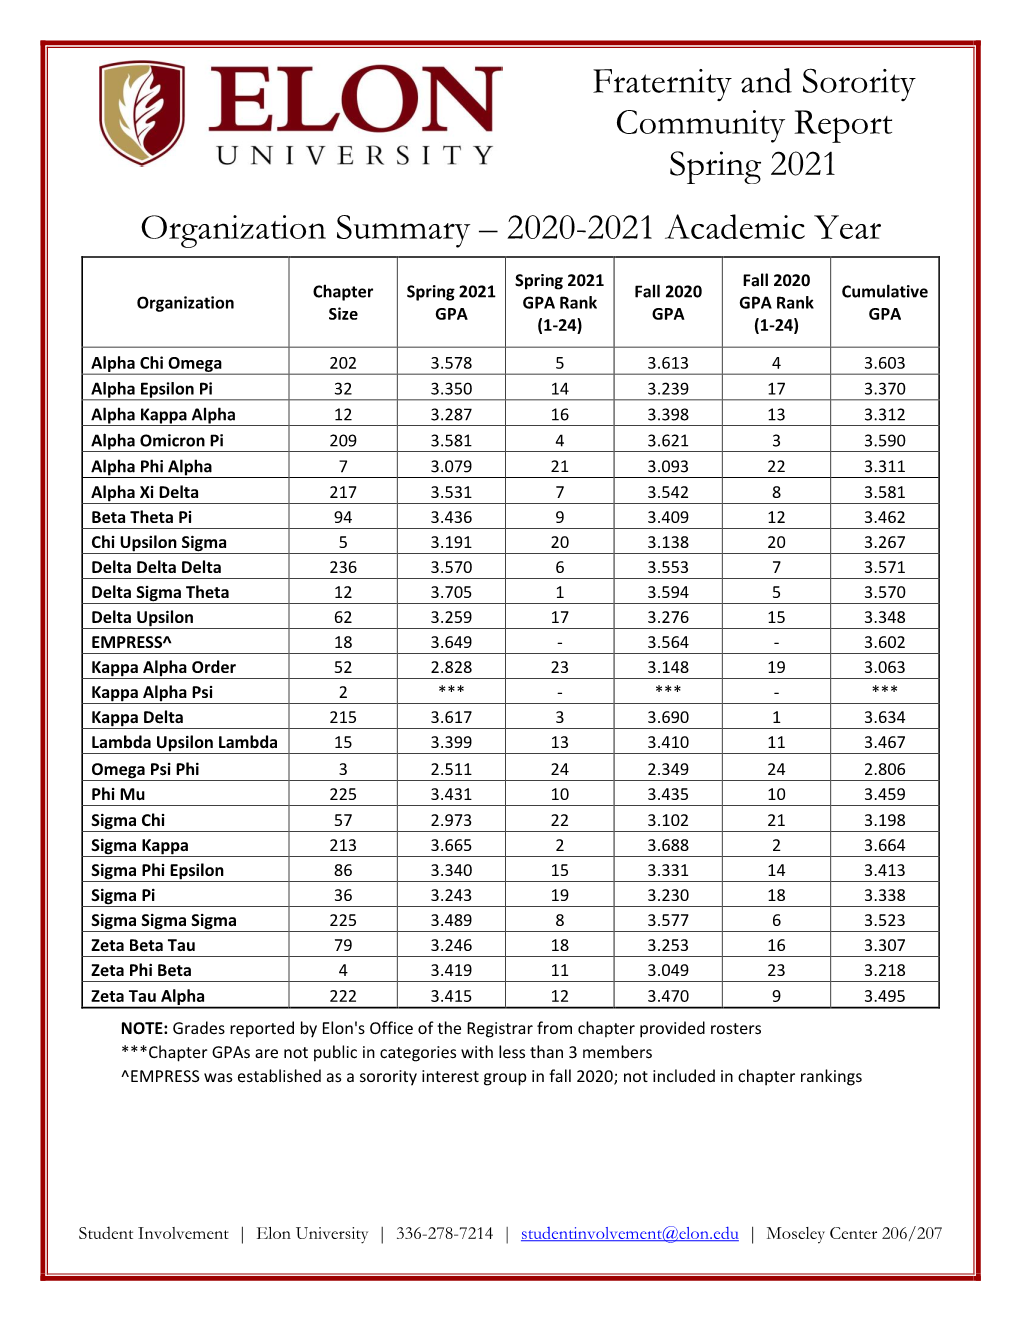 Spring 2021 Fraternity and Sorority Community Report